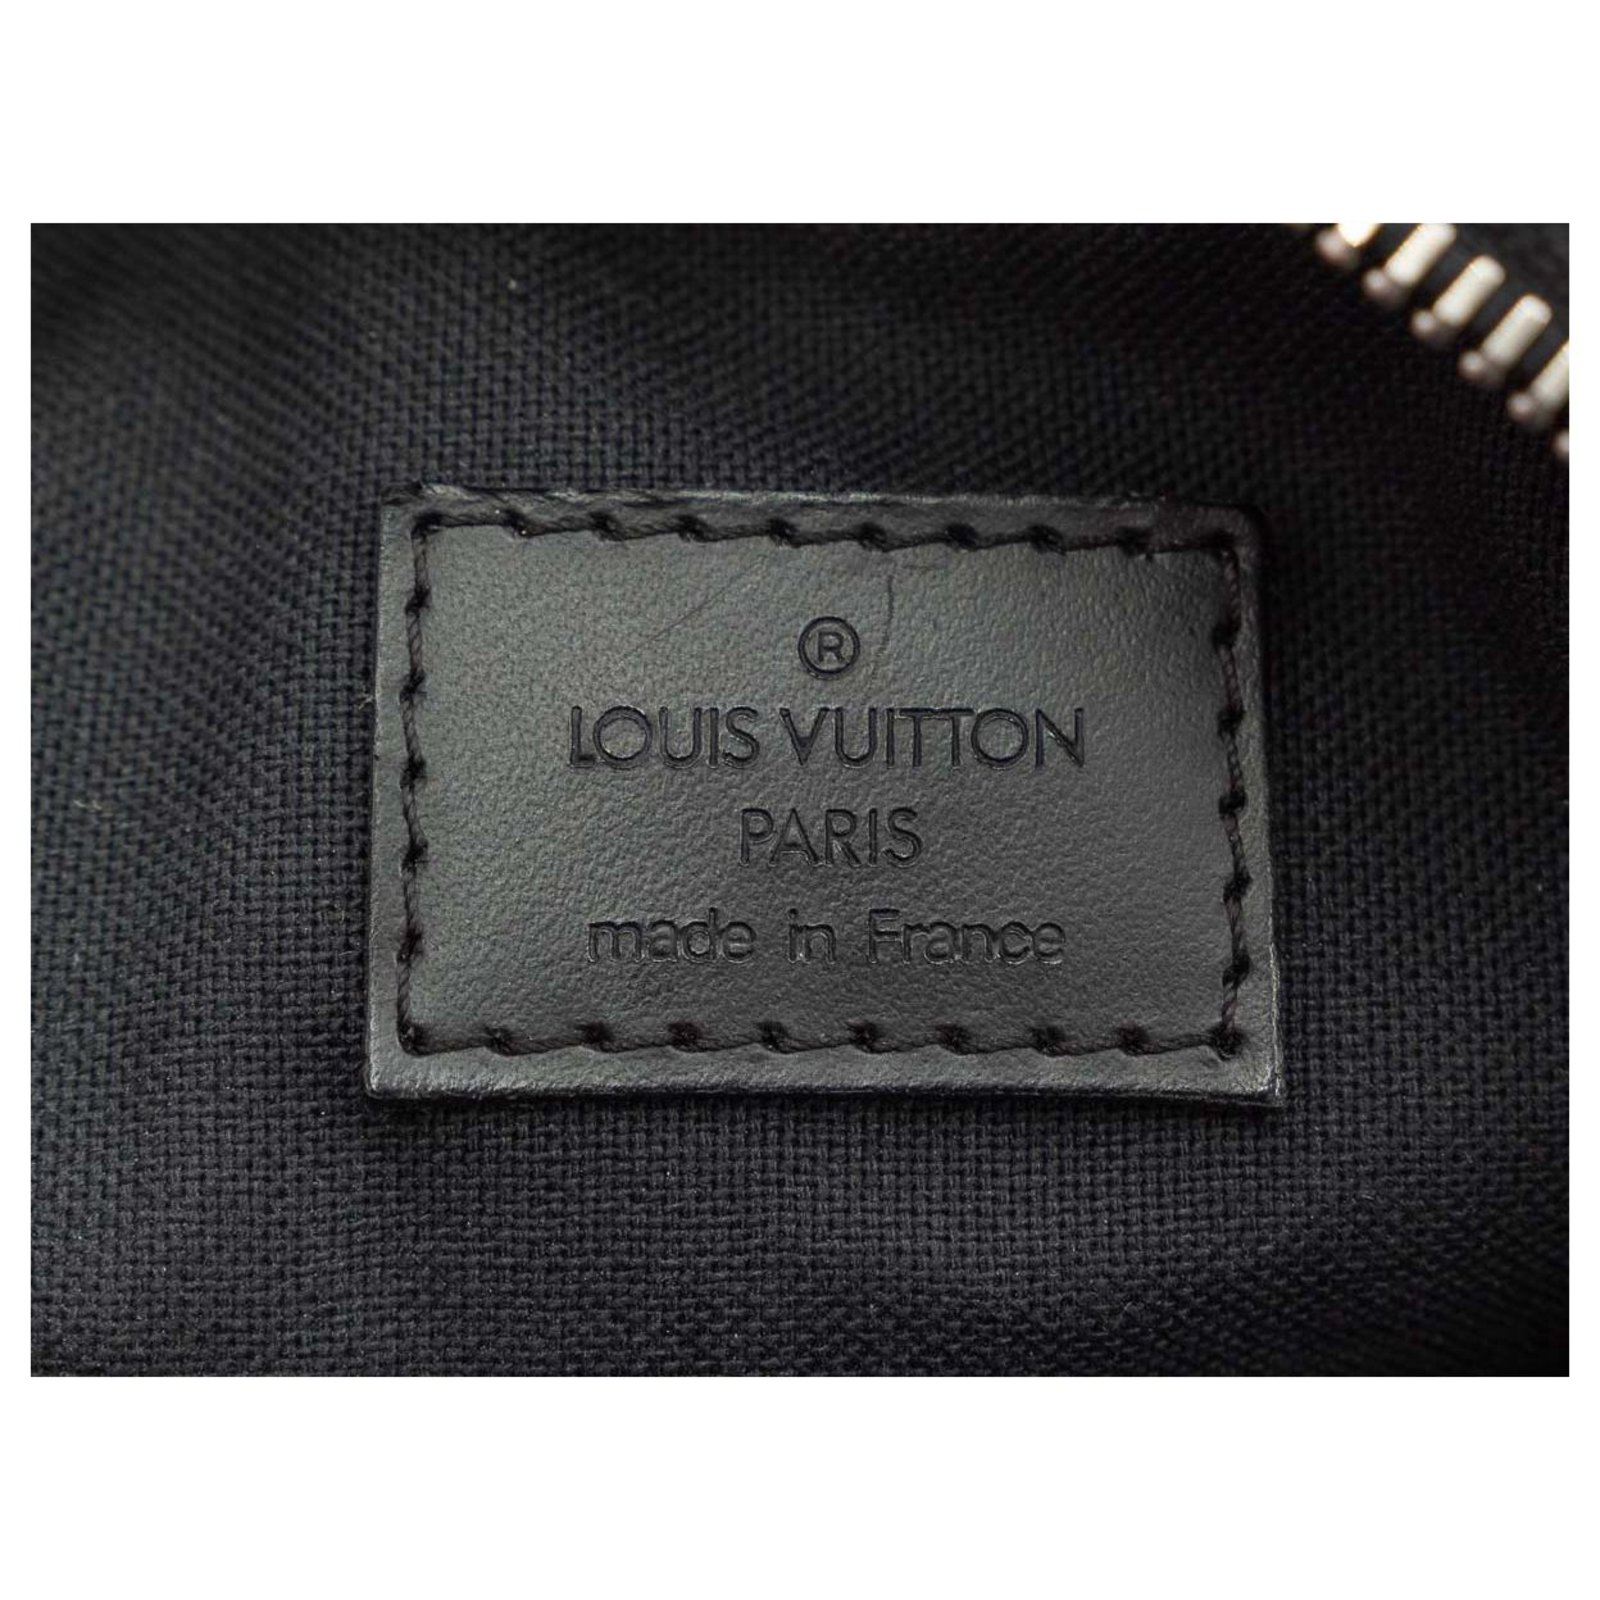 Louis Vuitton Canvas Gypsy Bag (Previously Owned) - ShopperBoard